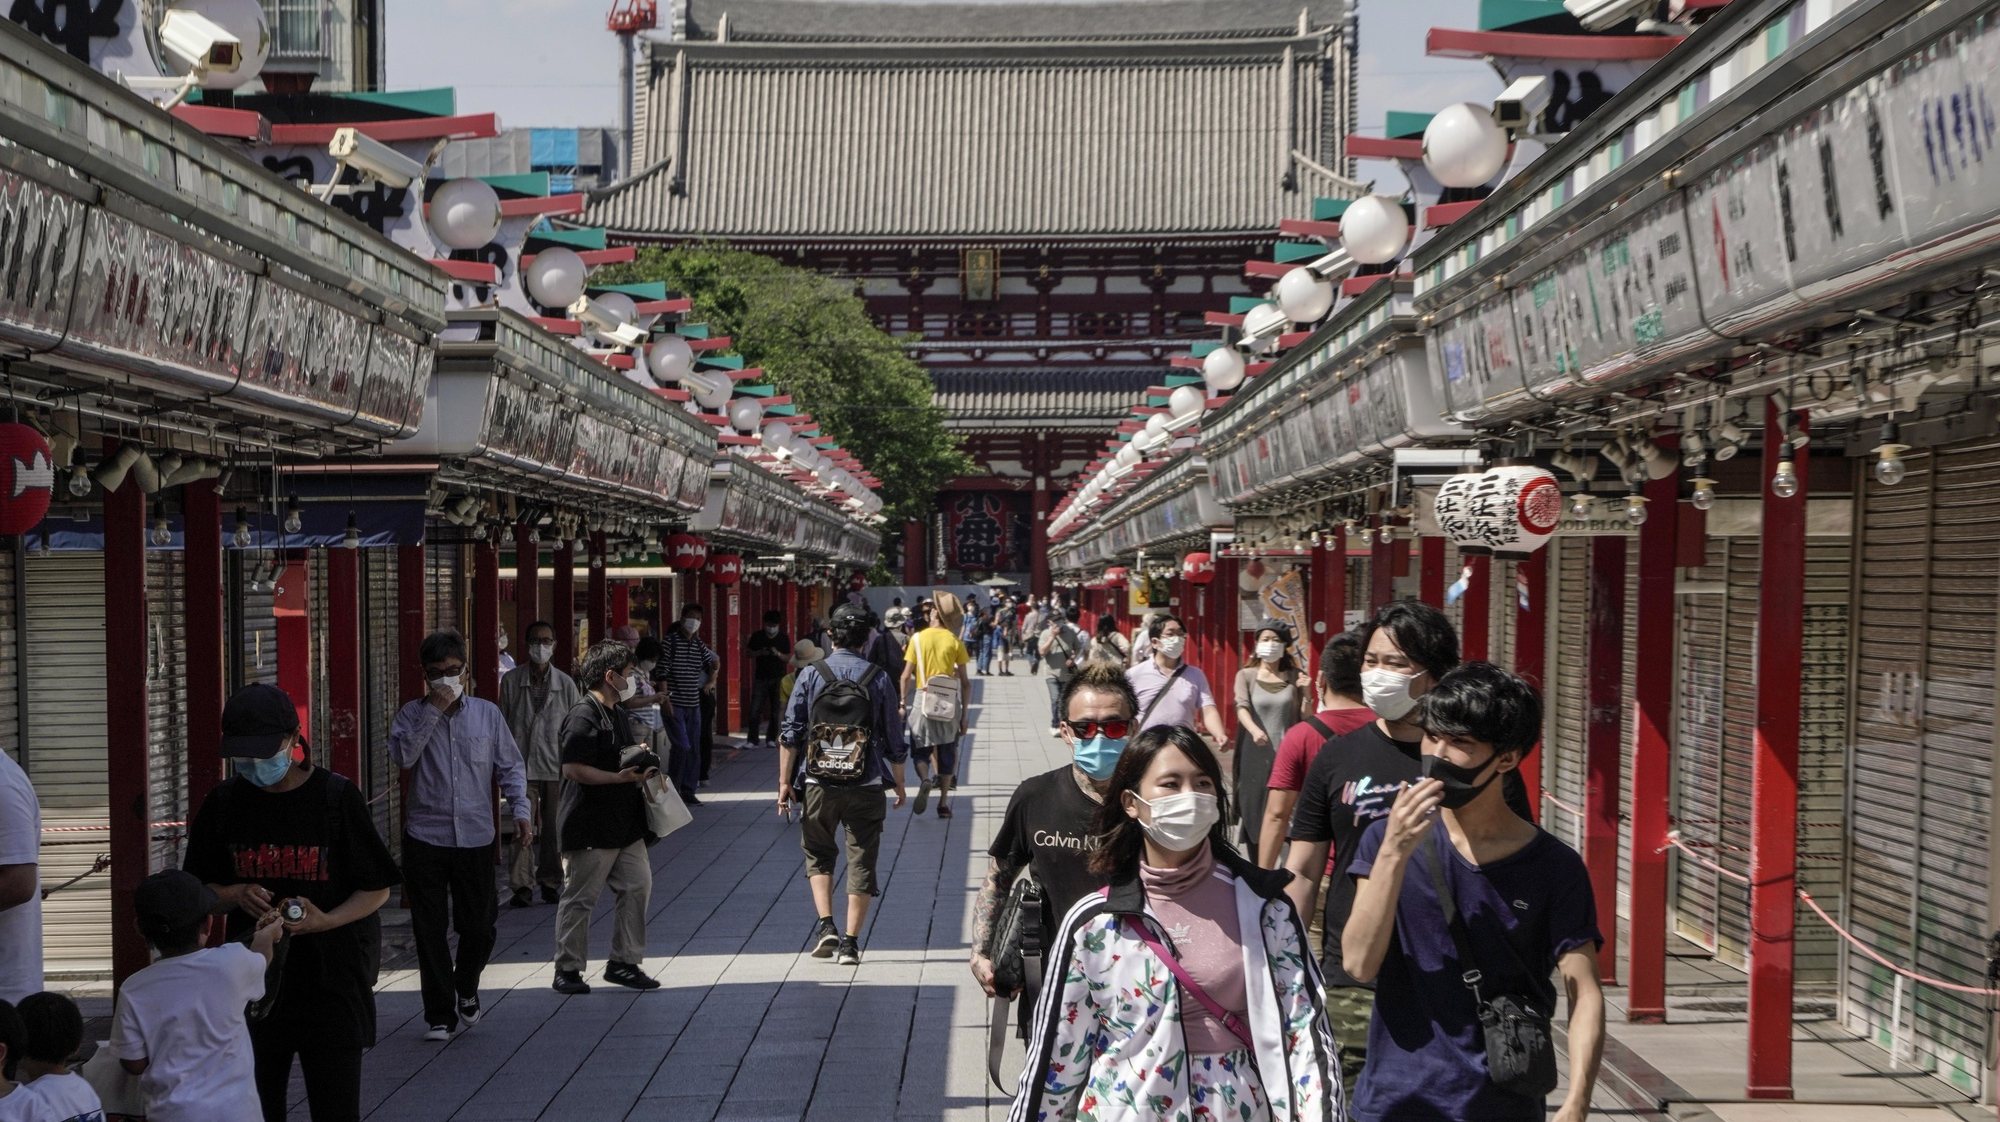 epa08427427 People walk through Nakamise Street, the main approach to Sensoji temple (Rear) at Asakusa, a sightseeing spot in Tokyo, Japan, 17 May 2020 under a coronavirus state of emergency. Japanese Prime Minister Shinzo Abe announced on 14 May 2020 to lift the state of emergency from 39 of 47 prefectures in Japan and is expected he may re-determine 0n 21 May to lift the declaration of coronavirus state emergency from all over the country including Tokyo and the capital area, and Osaka, second biggest city in Japan.  EPA/KIMIMASA MAYAMA